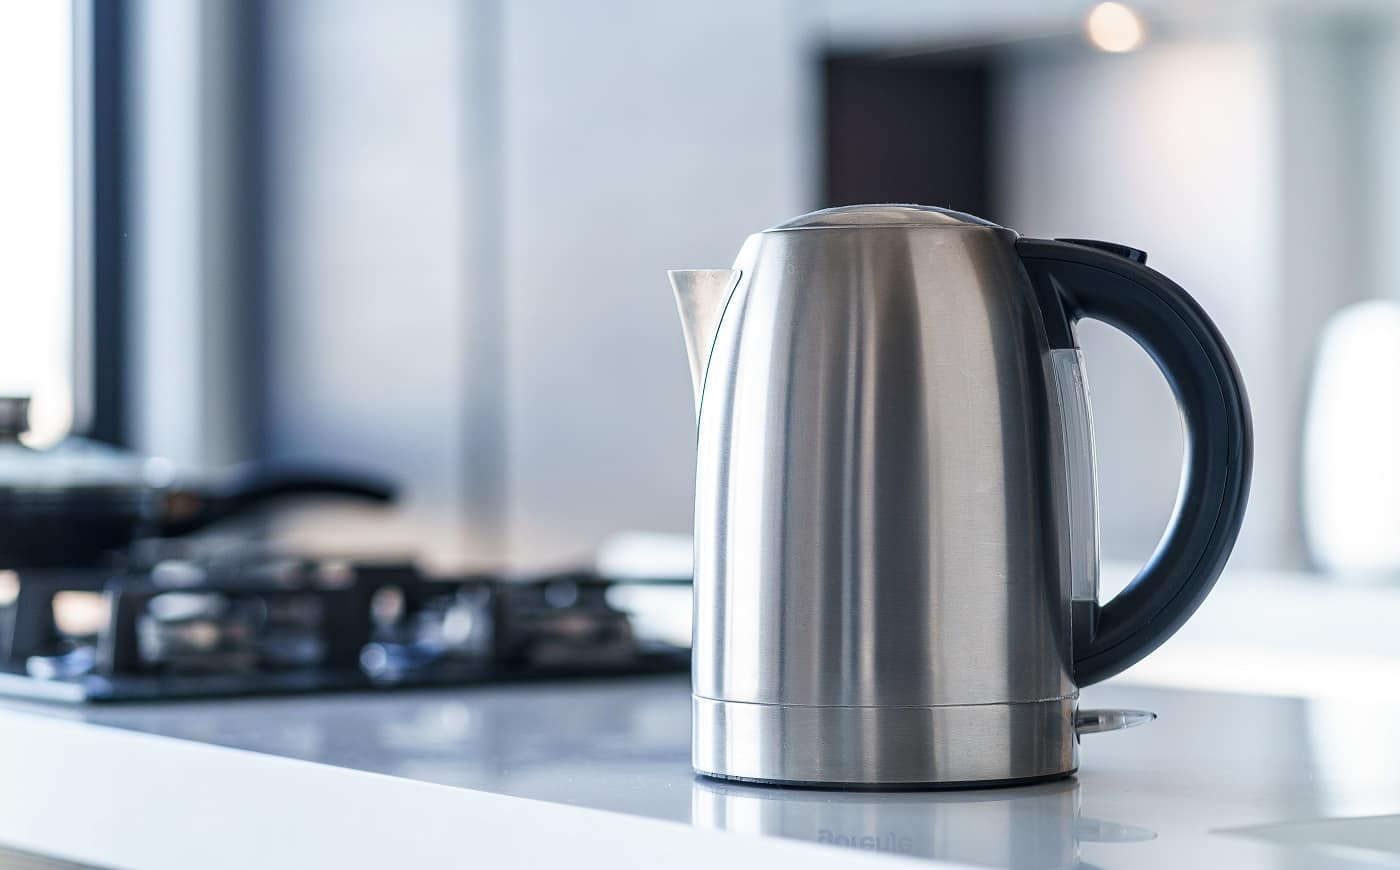 Silver metal electric kettle for boiling water and making tea on a table in the kitchen interior. Household kitchen appliances for makes hot drinks